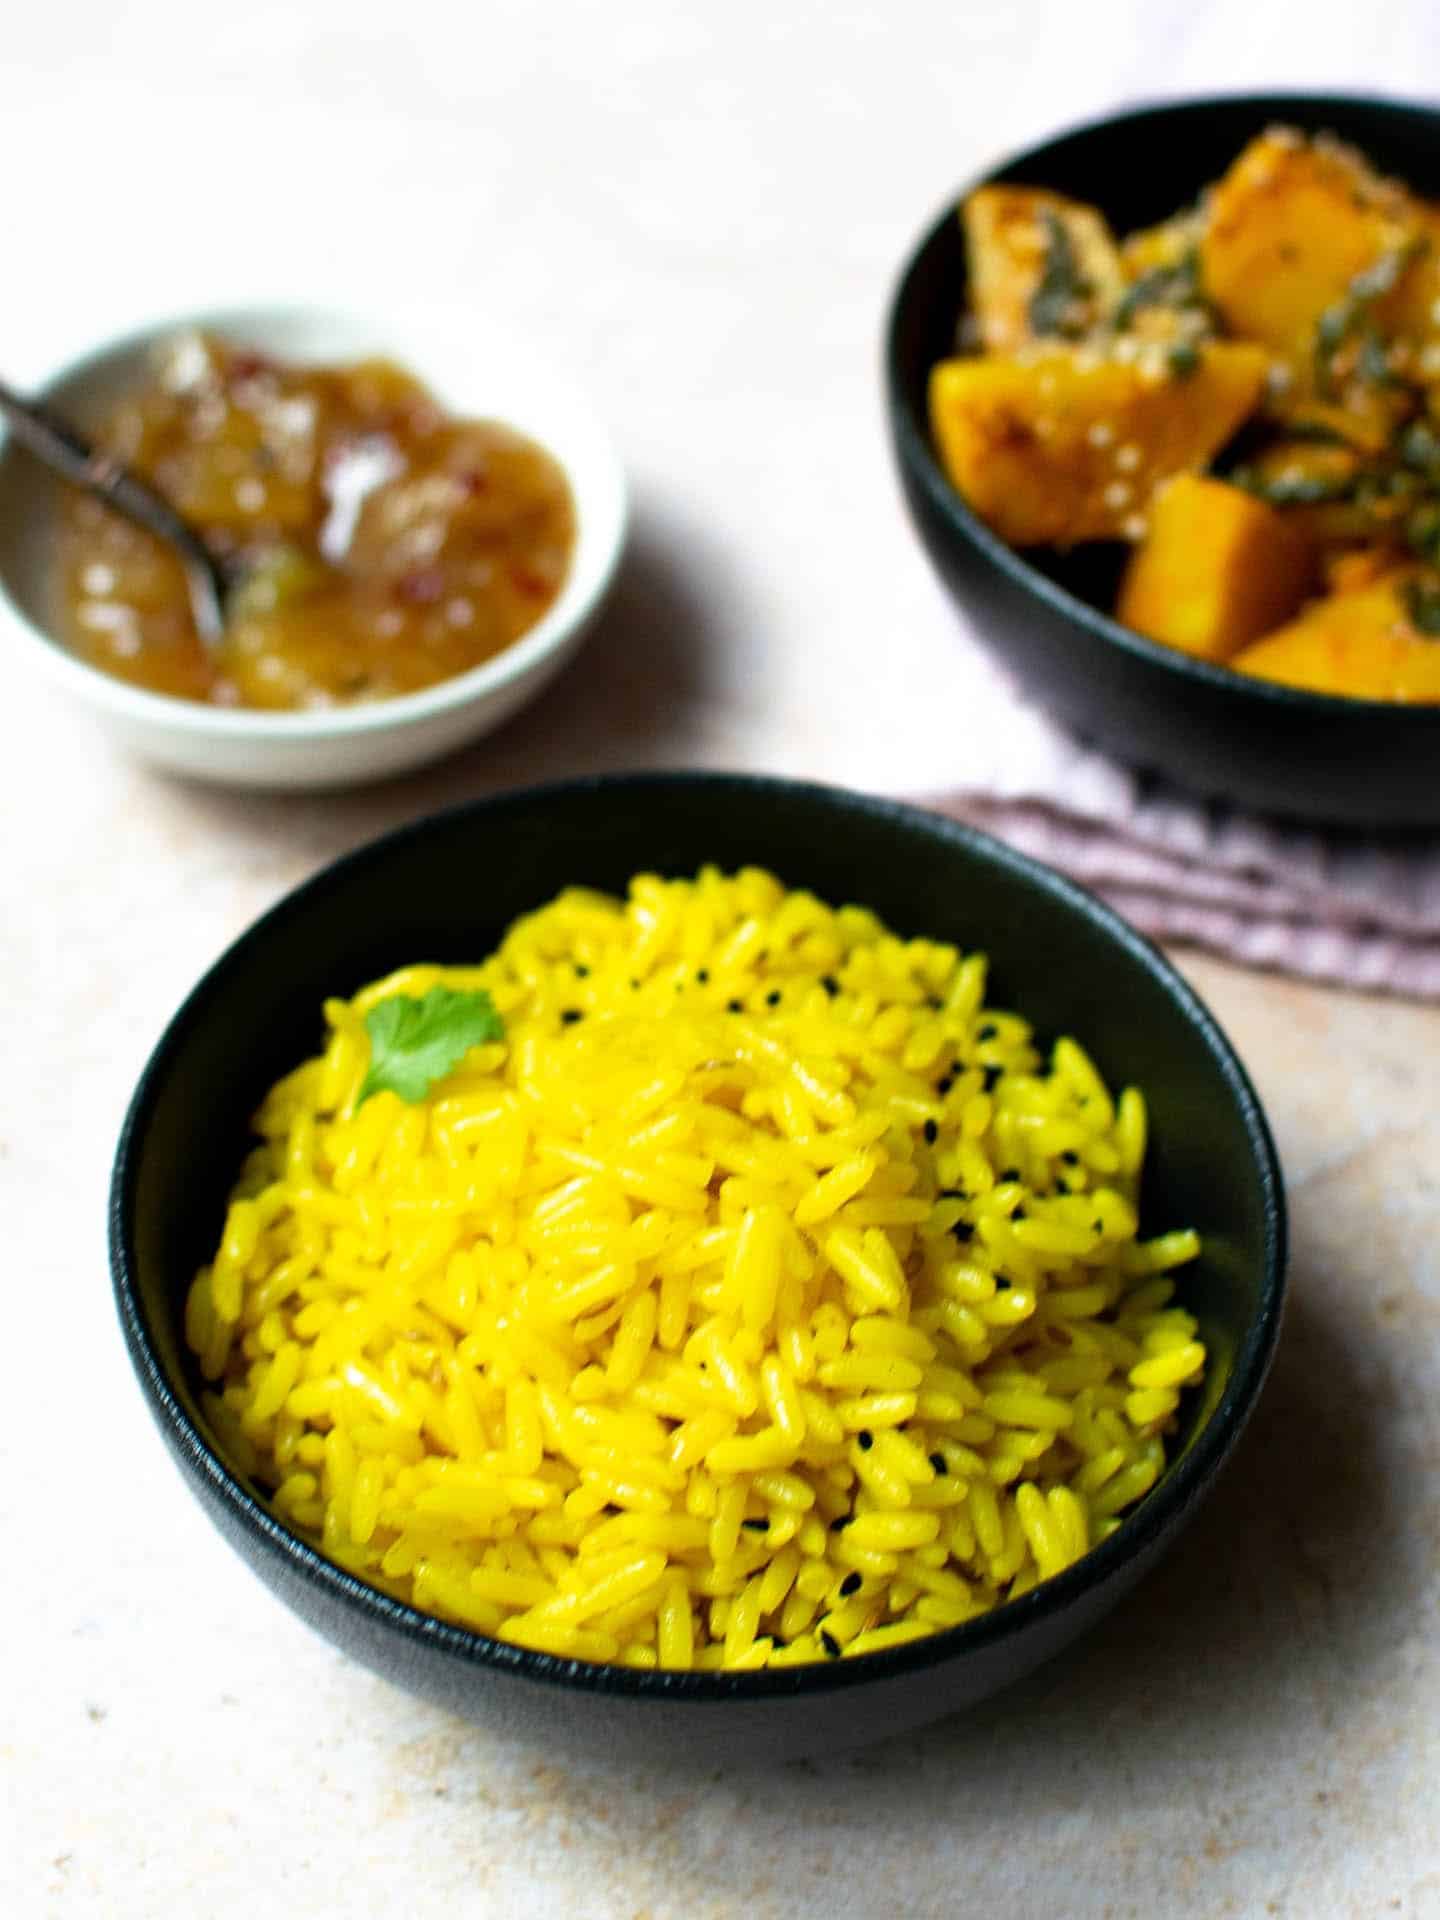 A close-up image of a serving of golden pilau rice in a black bowl. In the background is a potato dish and a small bowl of chutney. The rice in the foreground is sprinkled with some nigella seeds and a bit of fresh coriander.